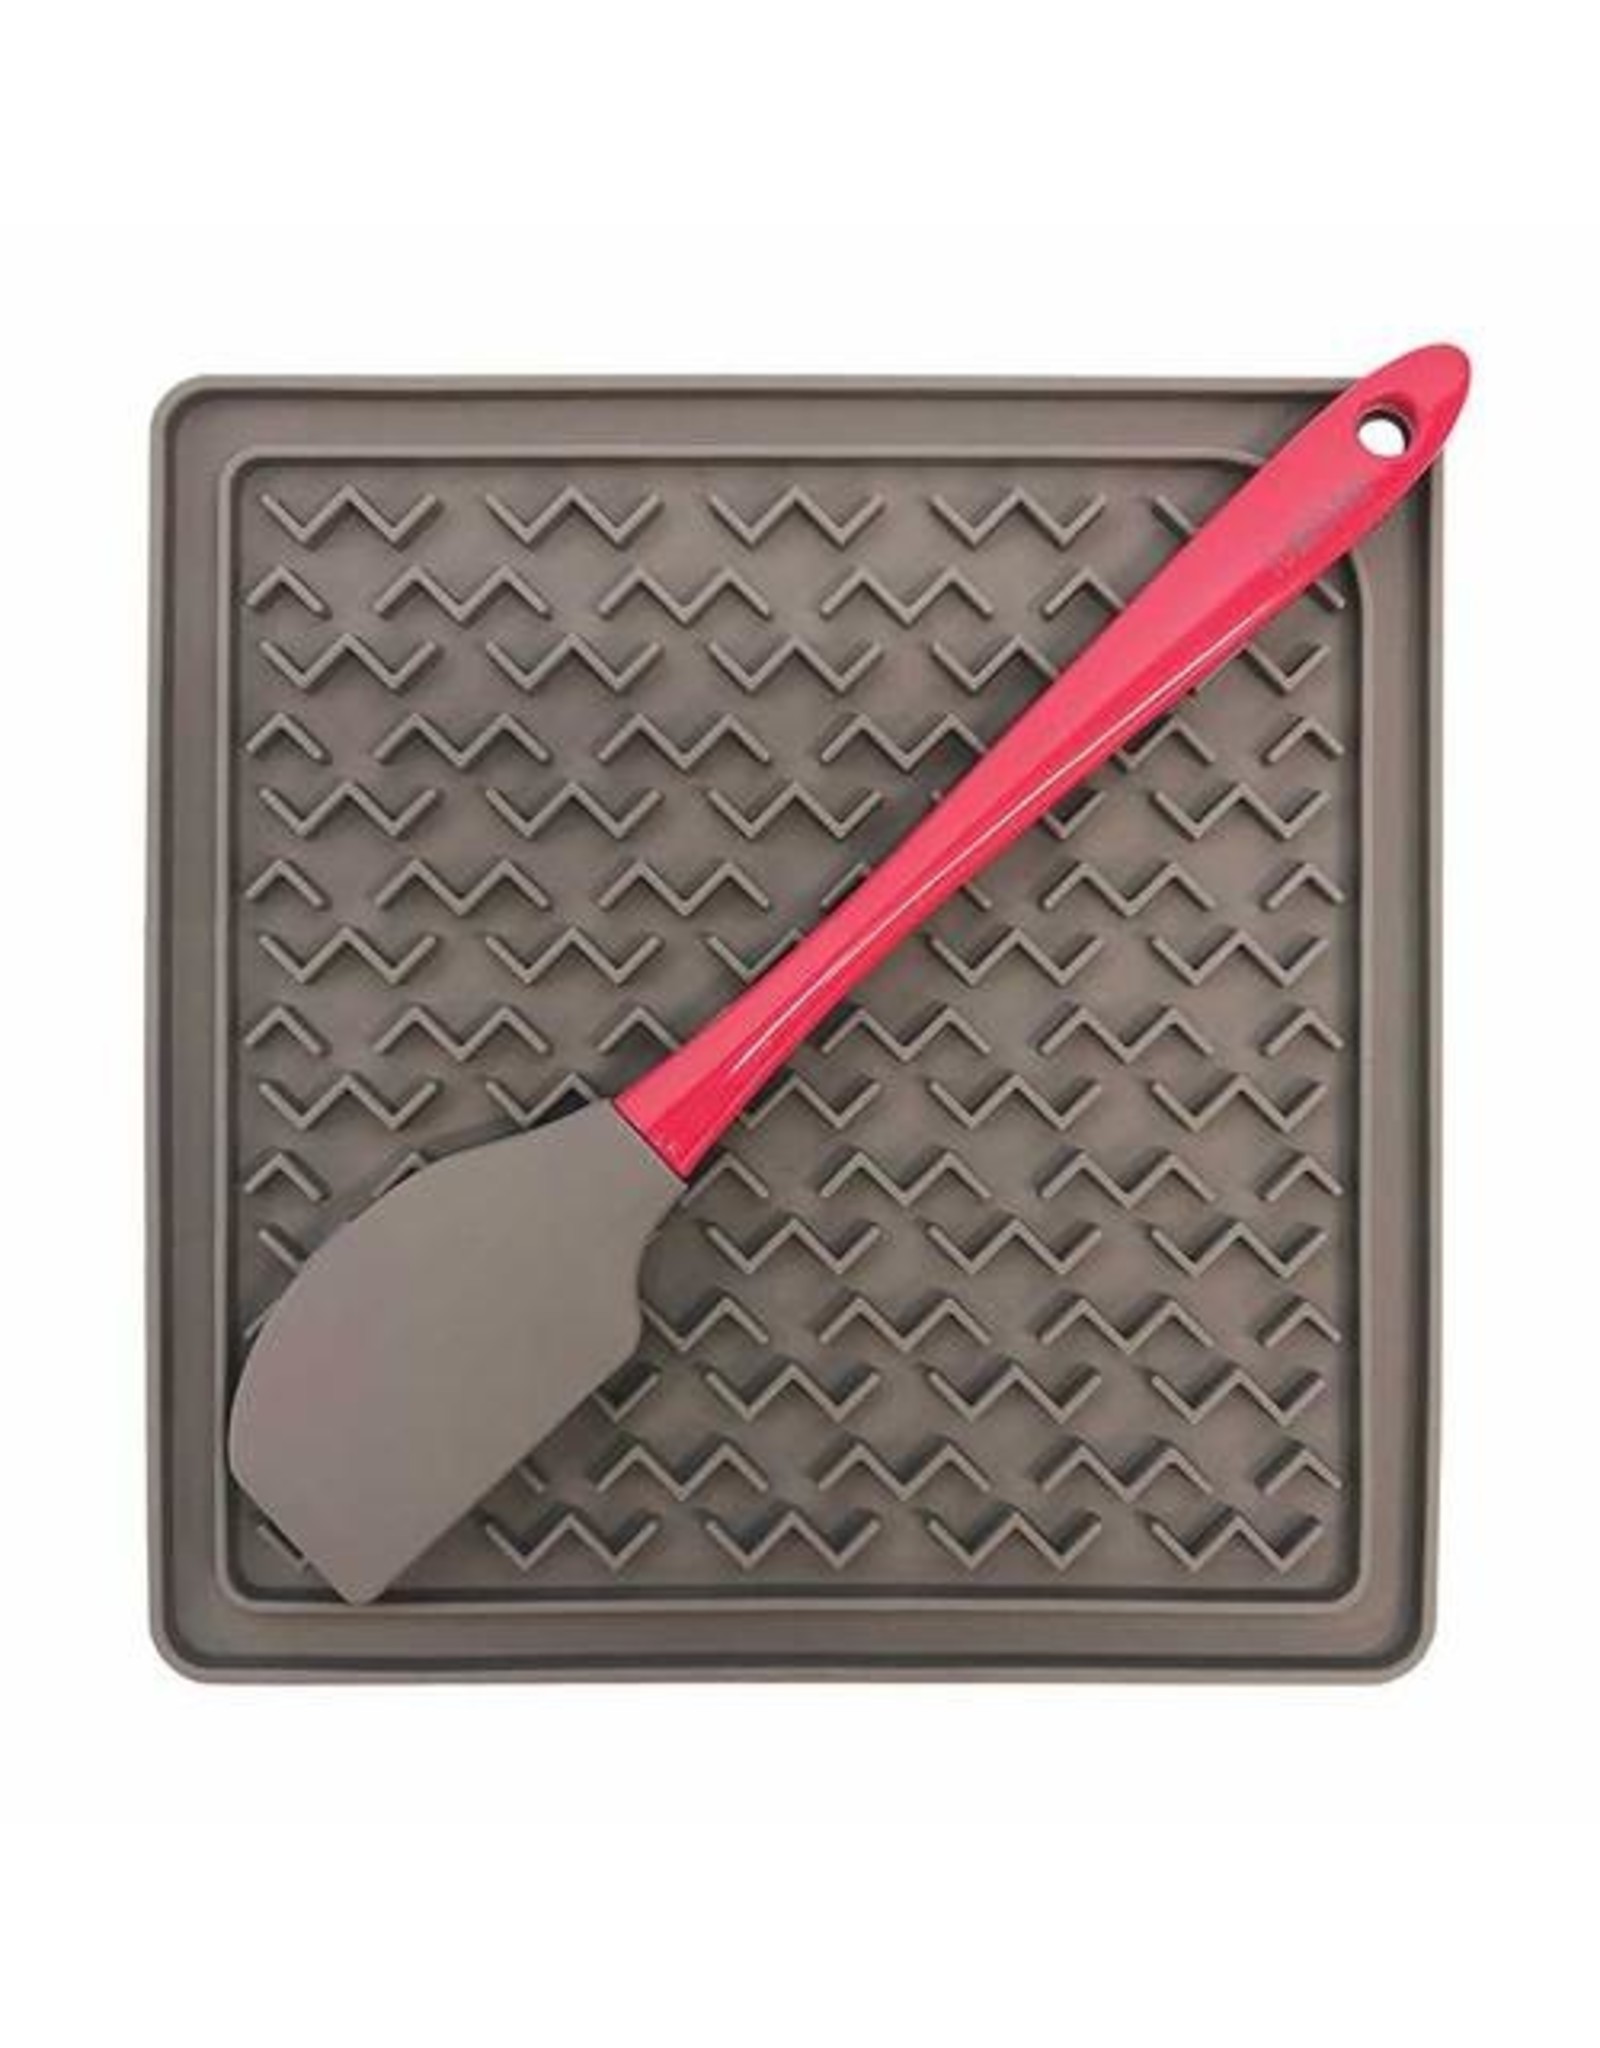 Messy Mutts Silicone Therapeutic Feeding Mat with Spatula